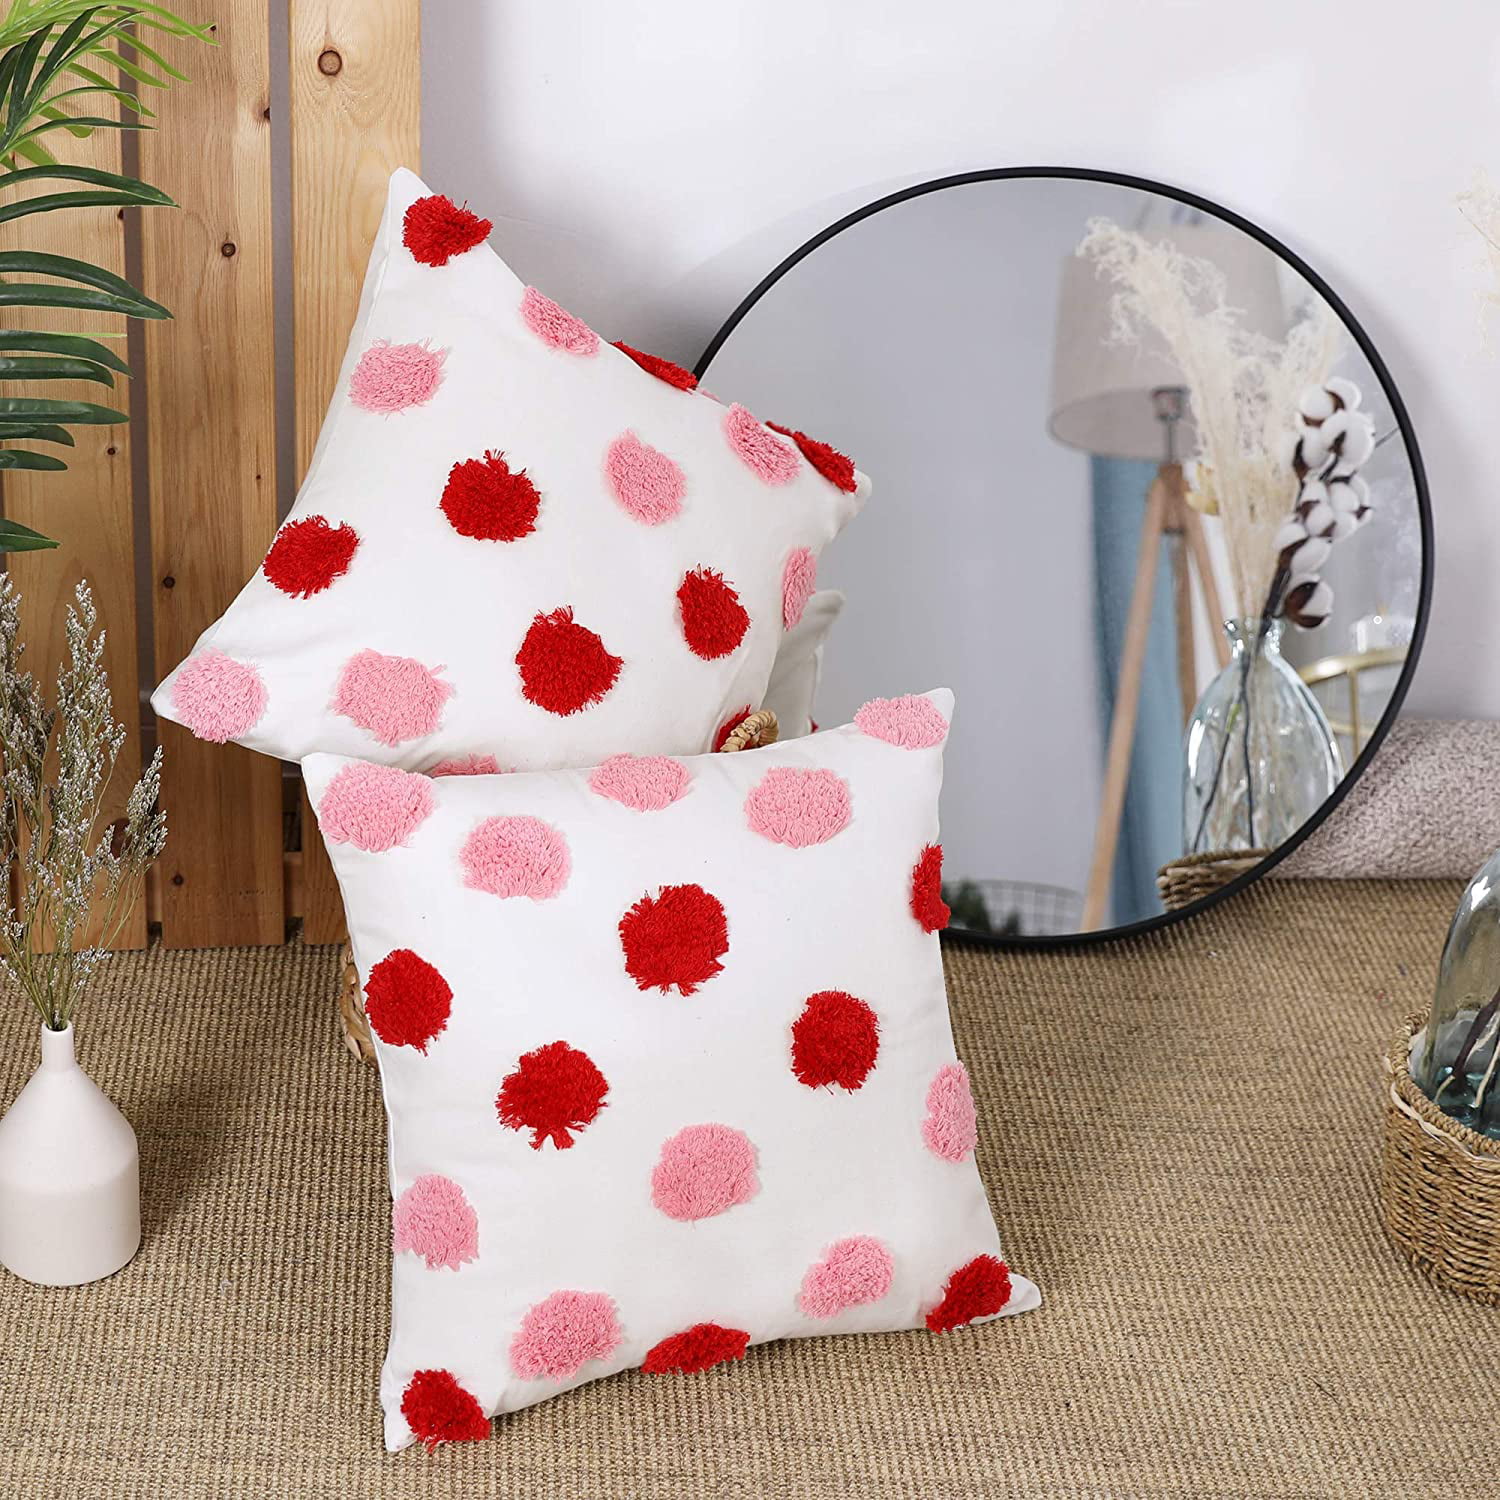 Deconovo Boho Decorative Tufted Throw Pillow Cover Pompoms Pillowcase Pink and Red Set of 2 18 x 18 Inch Cotton Linen Decorative Pillows Cushion Covers 